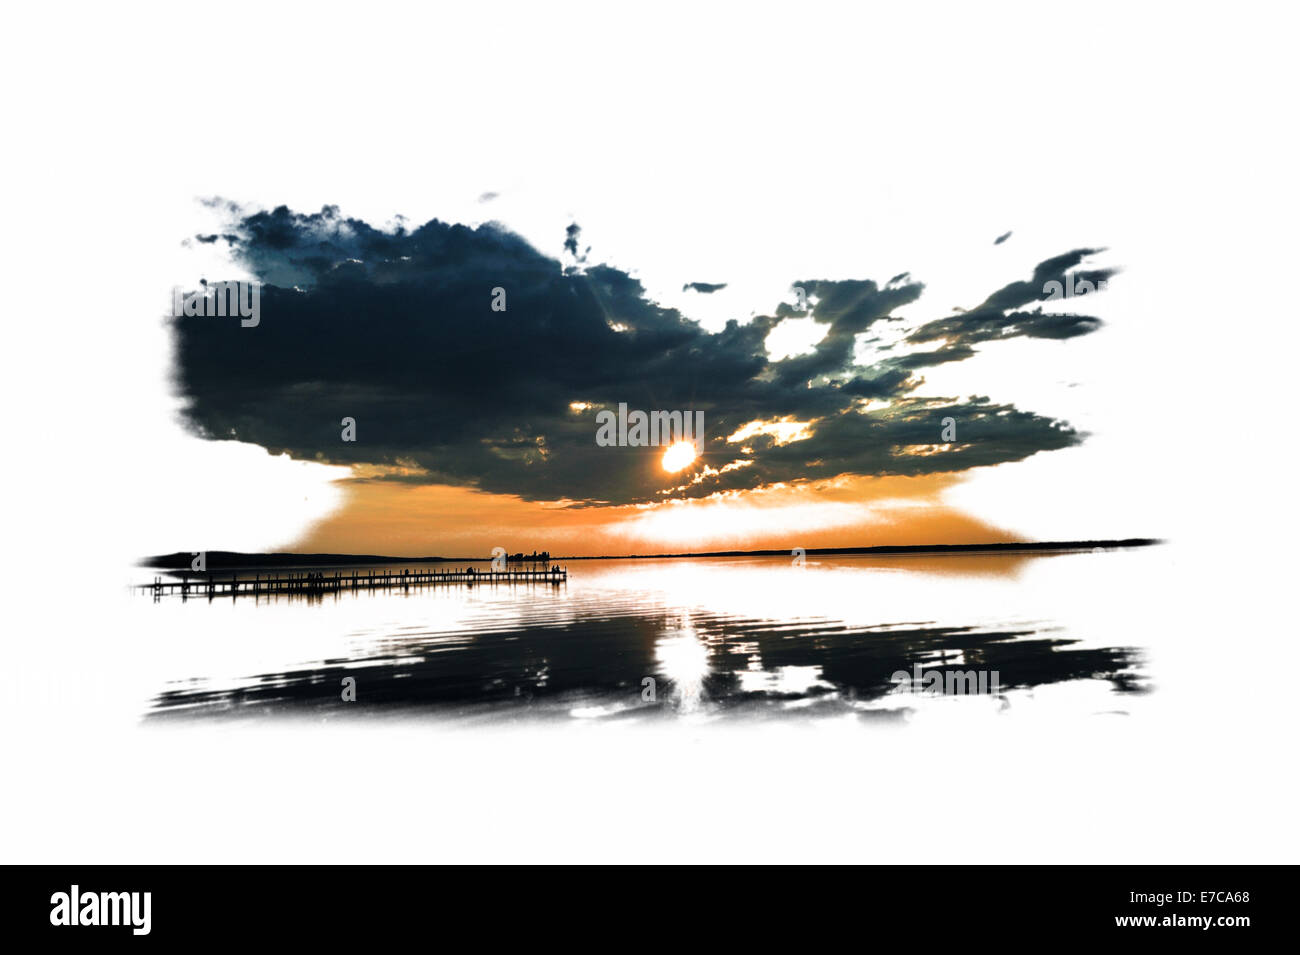 Graphics of Dramatic evening sky above the lake with a wooden pier in the foreground, Steinhude am Meer, Lower Saxony. Stock Photo